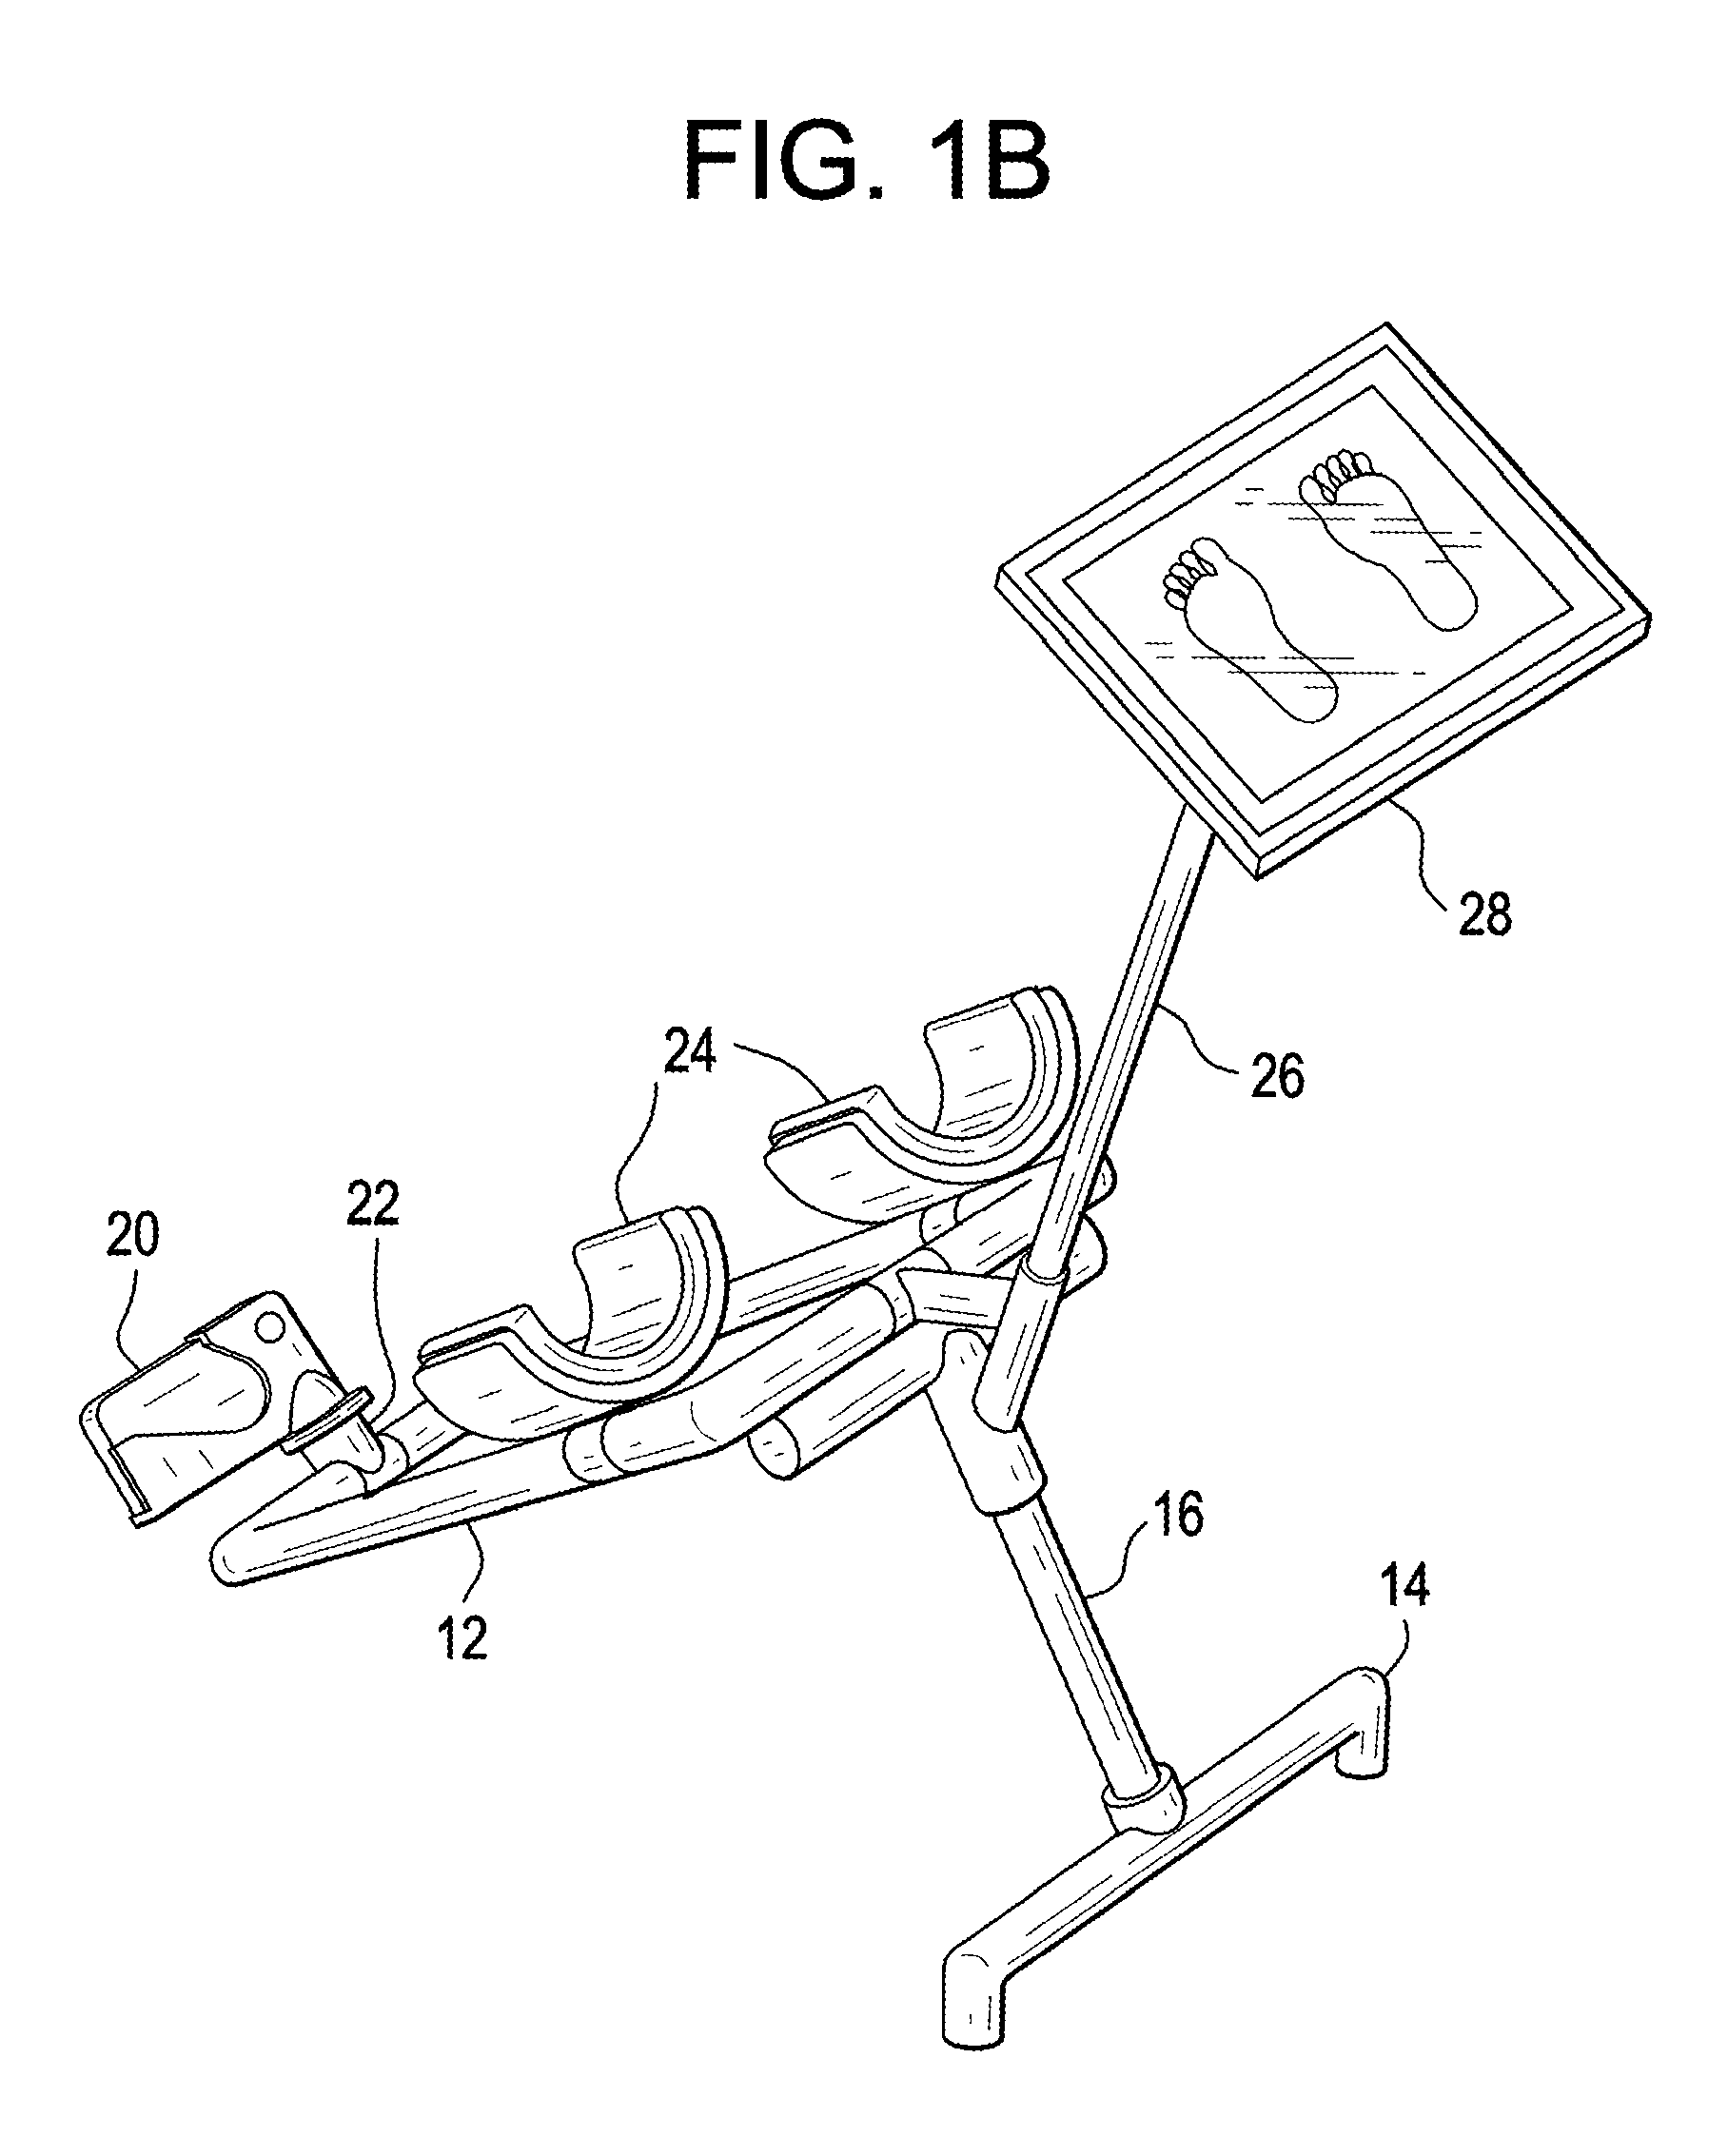 System for screening the skin condition of the plantar surface of the feet